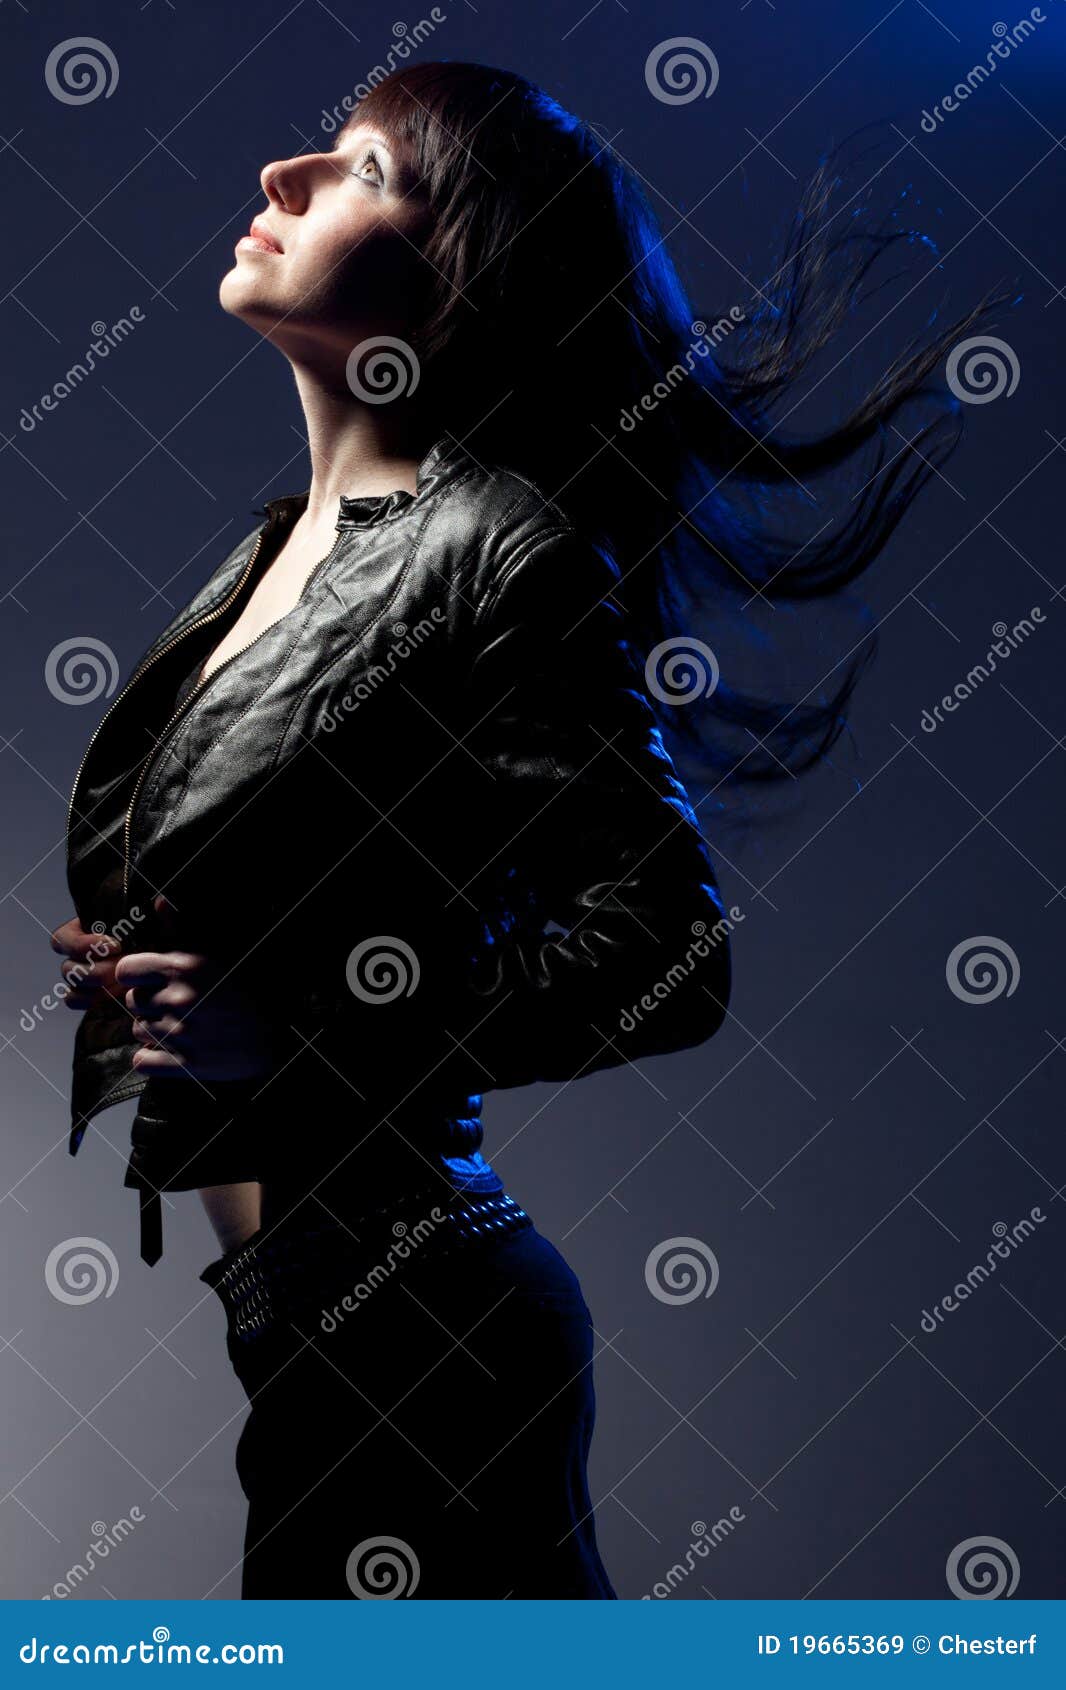 Woman Wearing Leather Jacket Stock Image - Image of posing, pretty ...